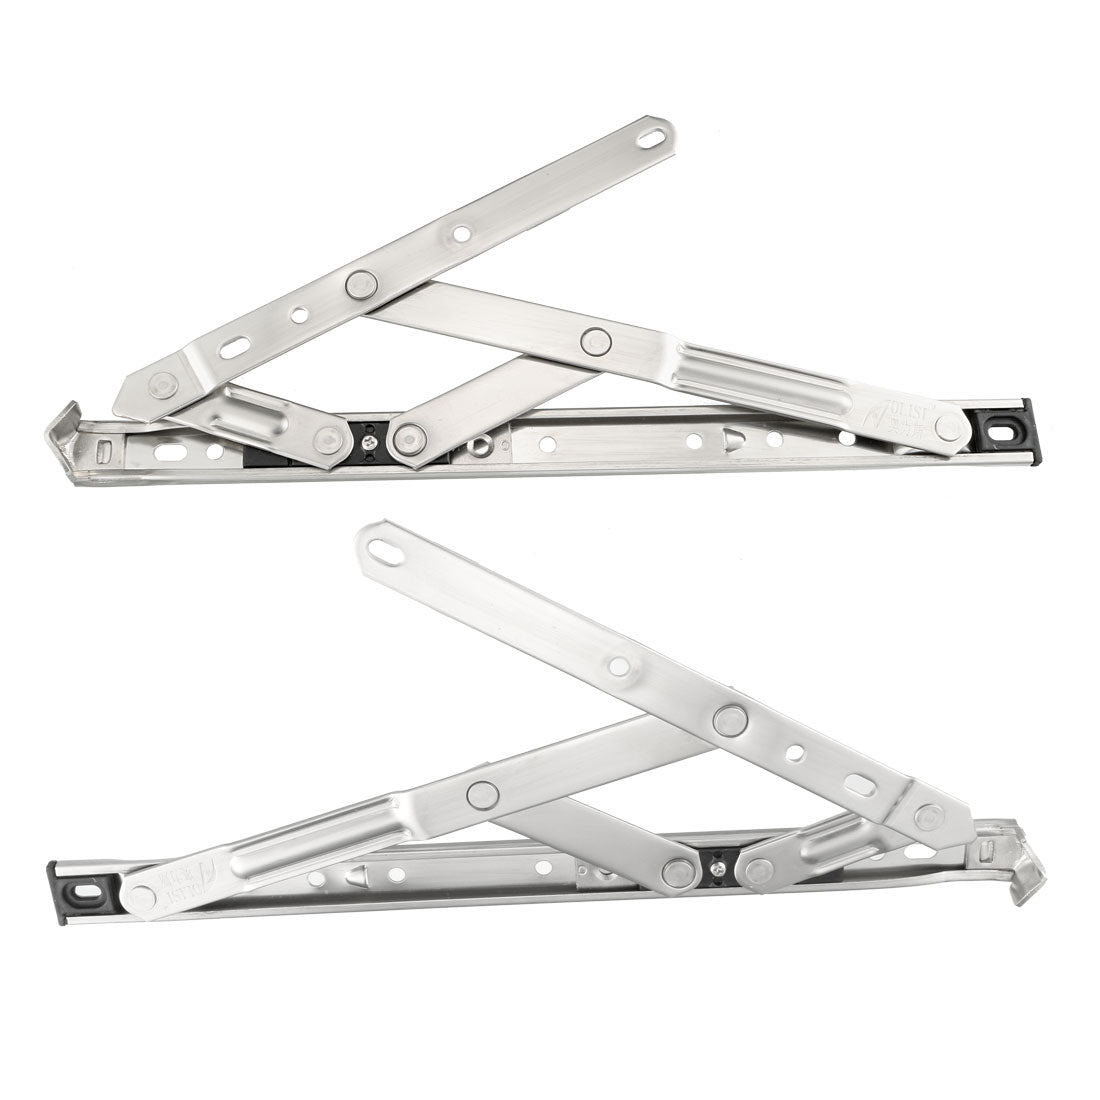 uxcell Uxcell 12-Inch Hanging/Casement Window Hinge, 202 Stainless Steel 2Pcs